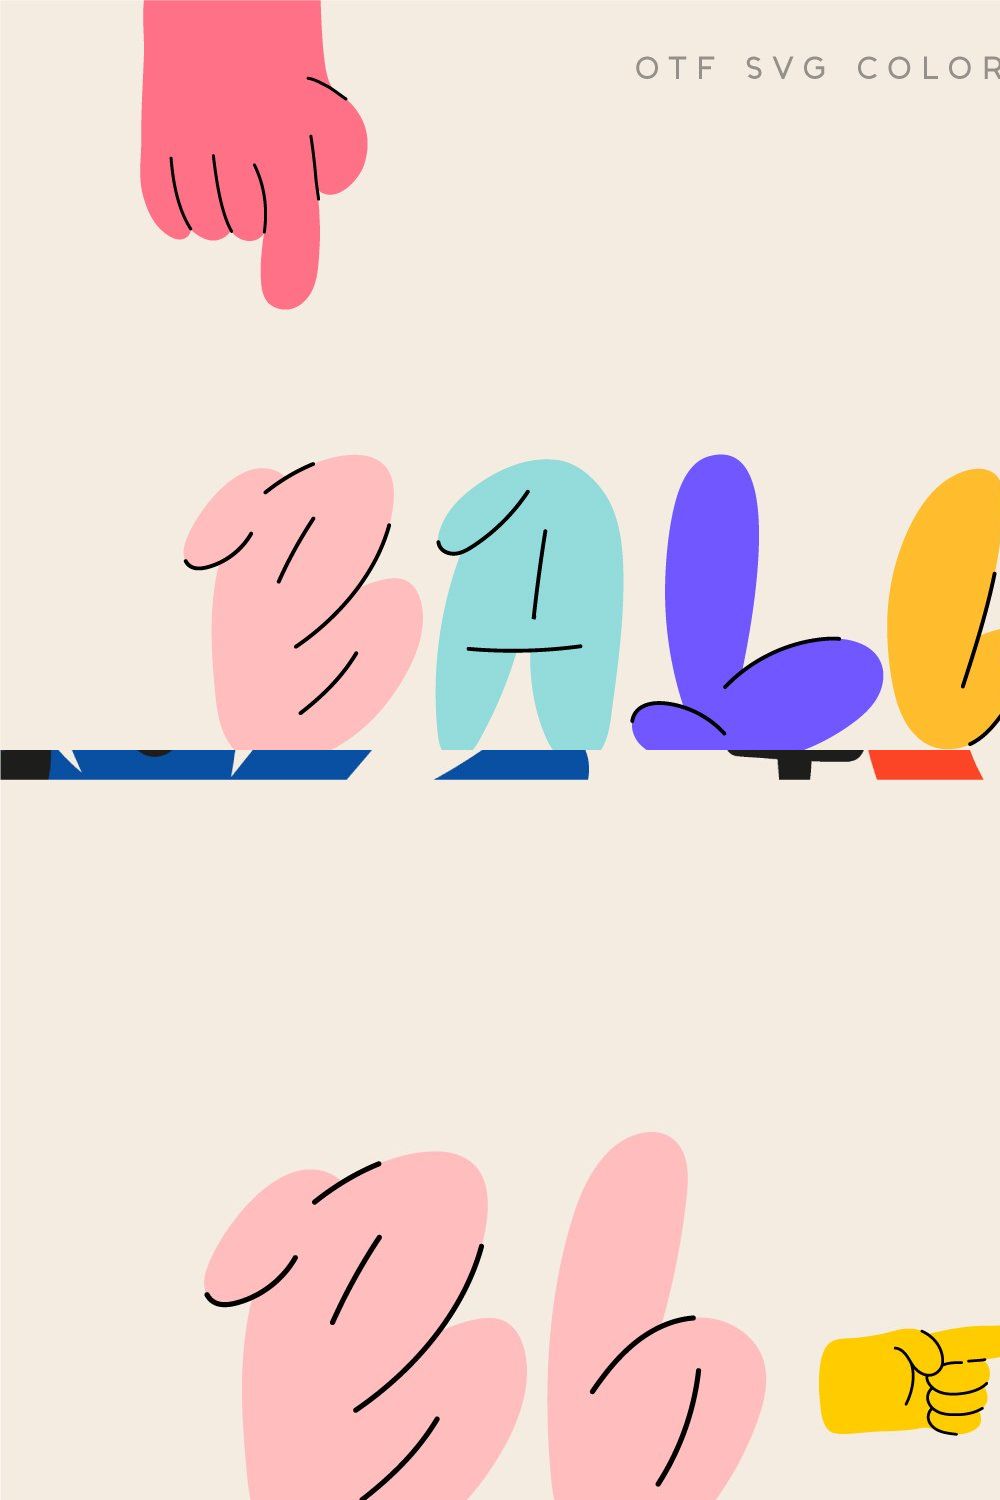 Baluno. OTF-SVG Color font family. pinterest preview image.